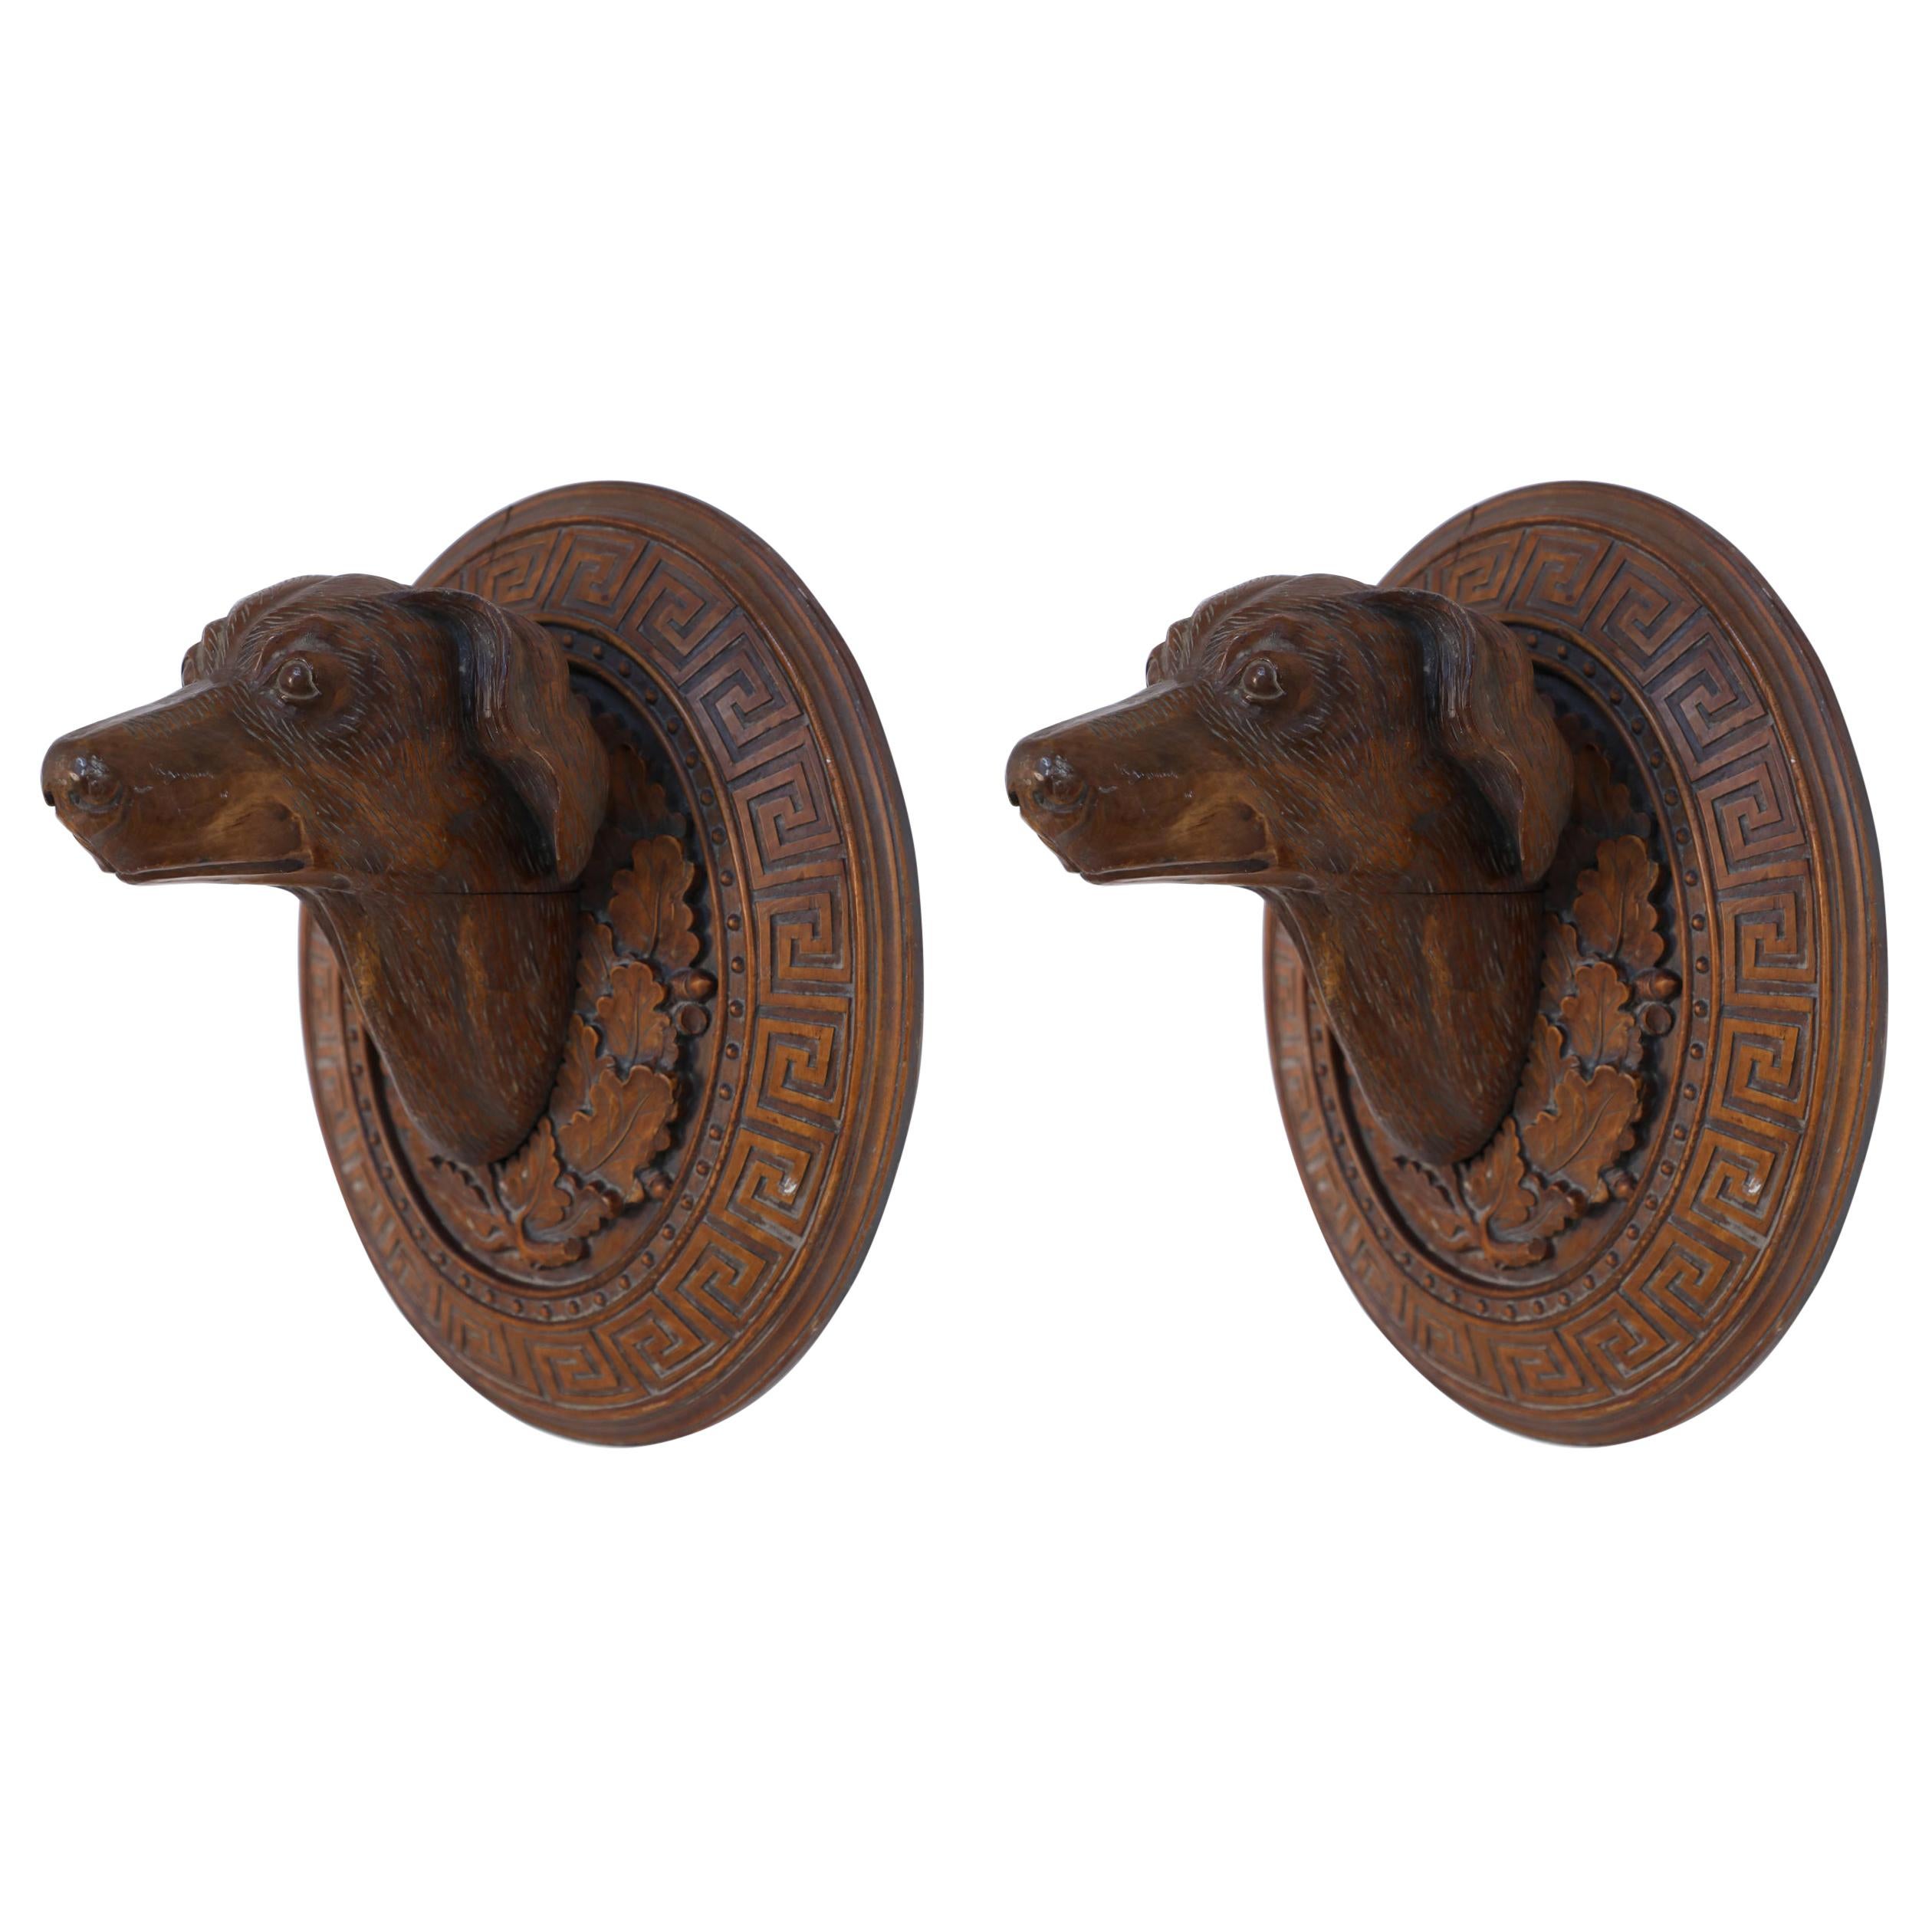 Pair of Vintage Carved Wooden Dog Head Wall Plaques